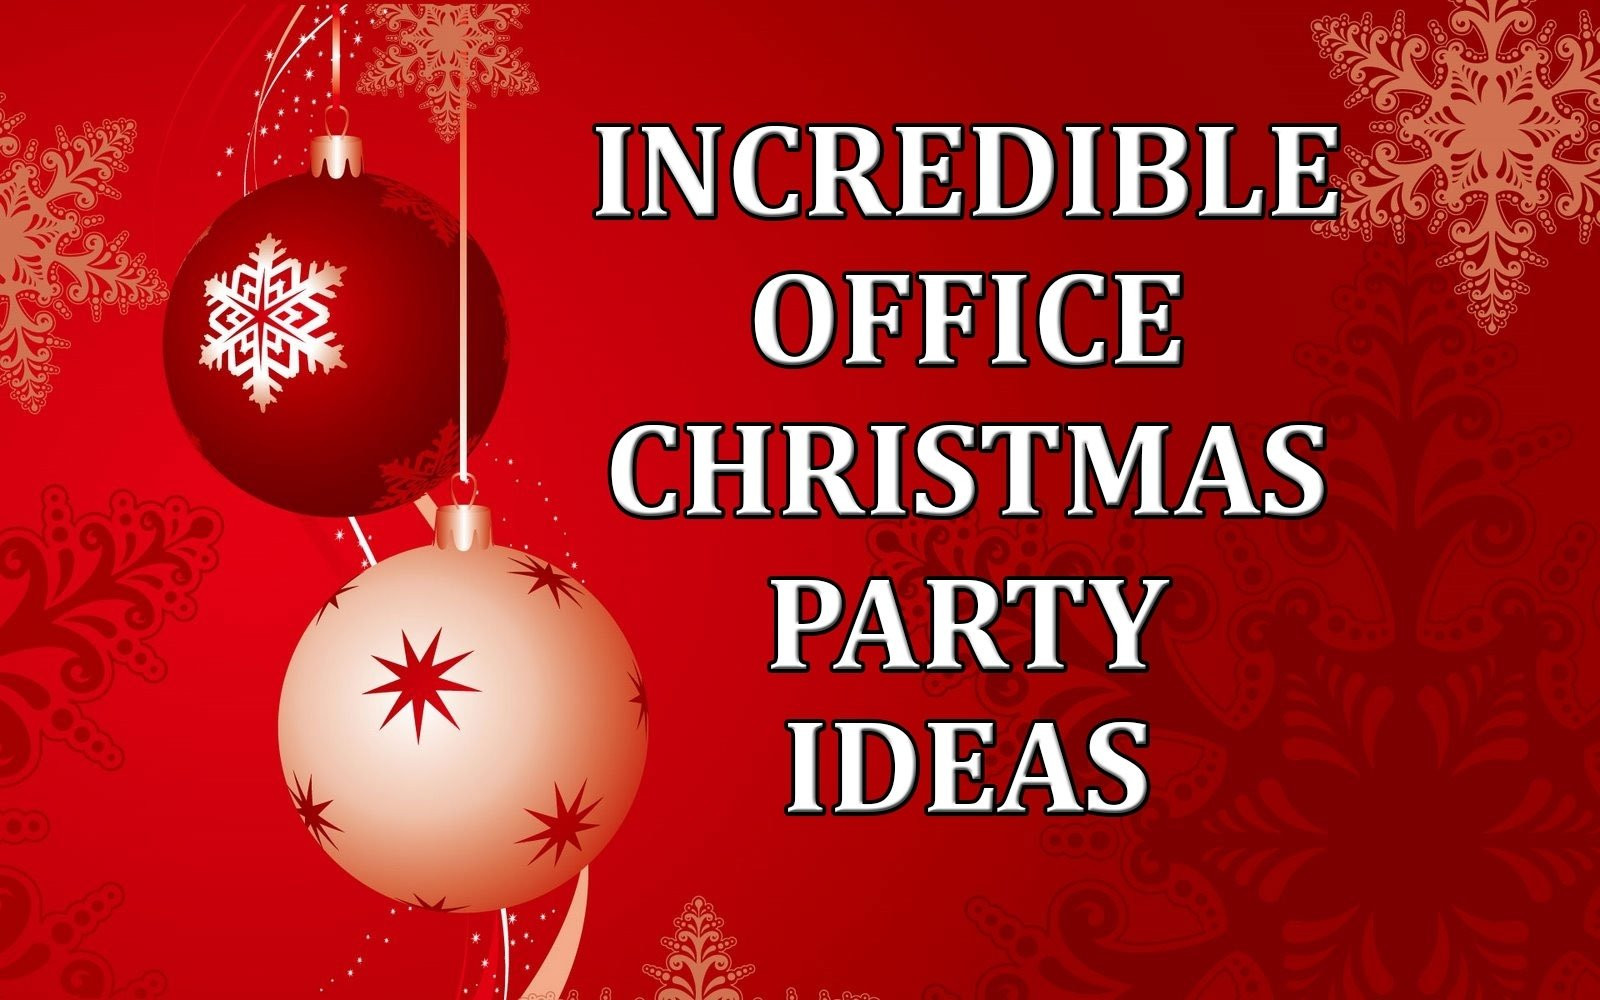 Office Holiday Party Entertainment Ideas
 10 Attractive Corporate Holiday Party Entertainment Ideas 2019